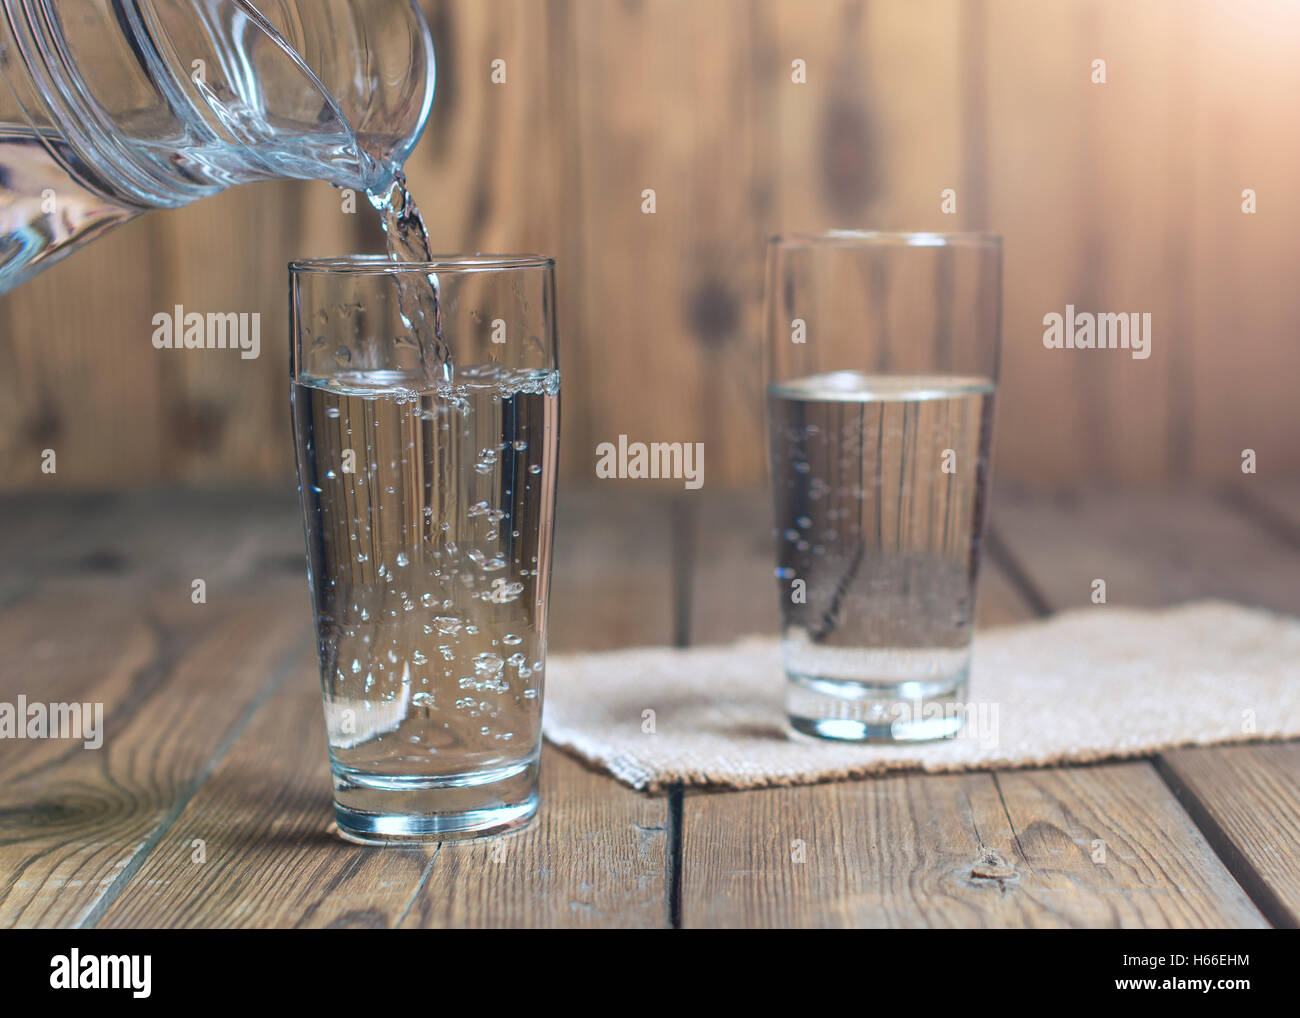 Glasses of water on a wooden table. Water was poured into the beaker. Selective focus. Shallow DOF. With lighting effects. Stock Photo